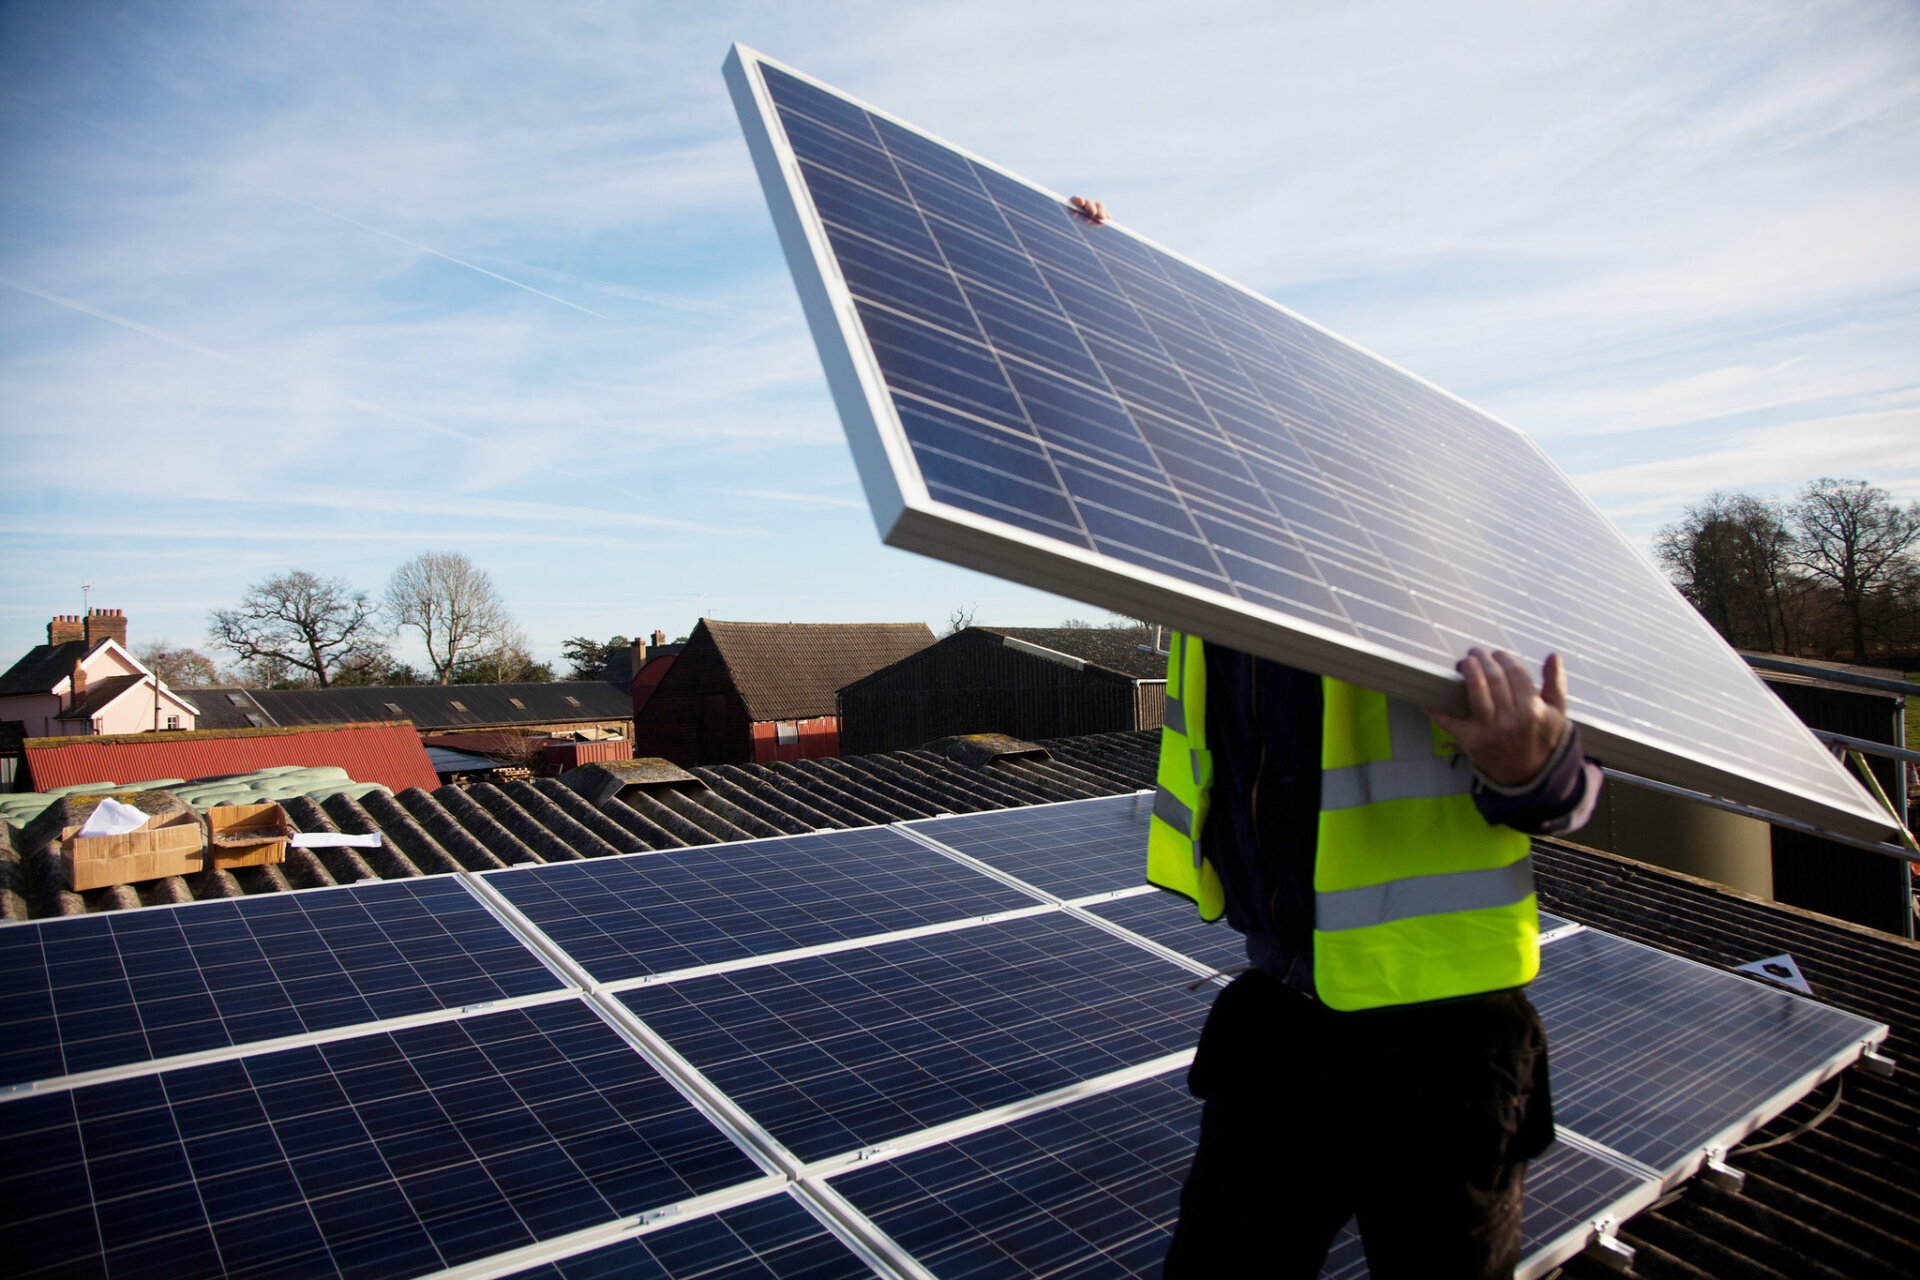 A builder holds a large solar panel in front of his face. Installing solar panels, a key part of energy security, on the roof of a home in Balcombe, UK.